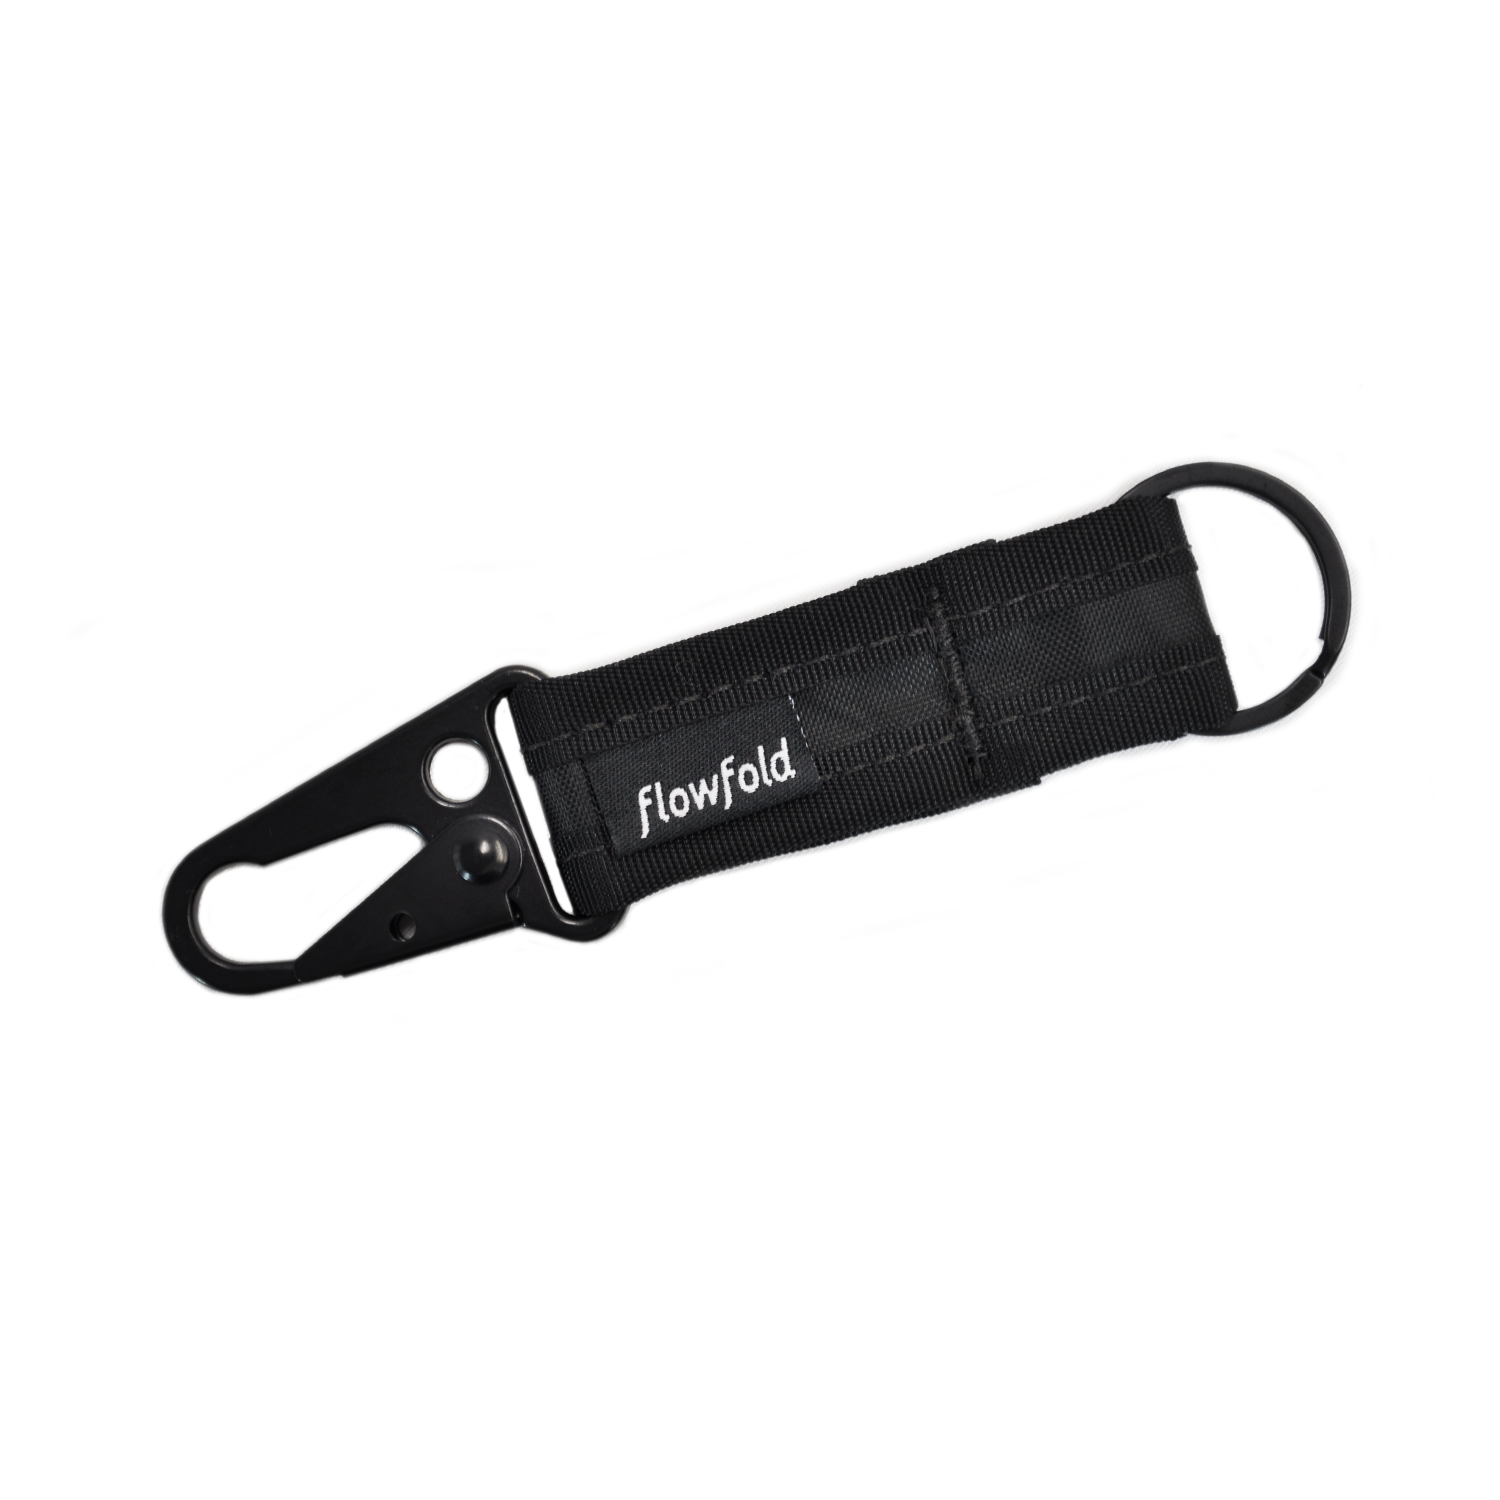 Black Snap Hook Keychain made from water resistant EcoPak